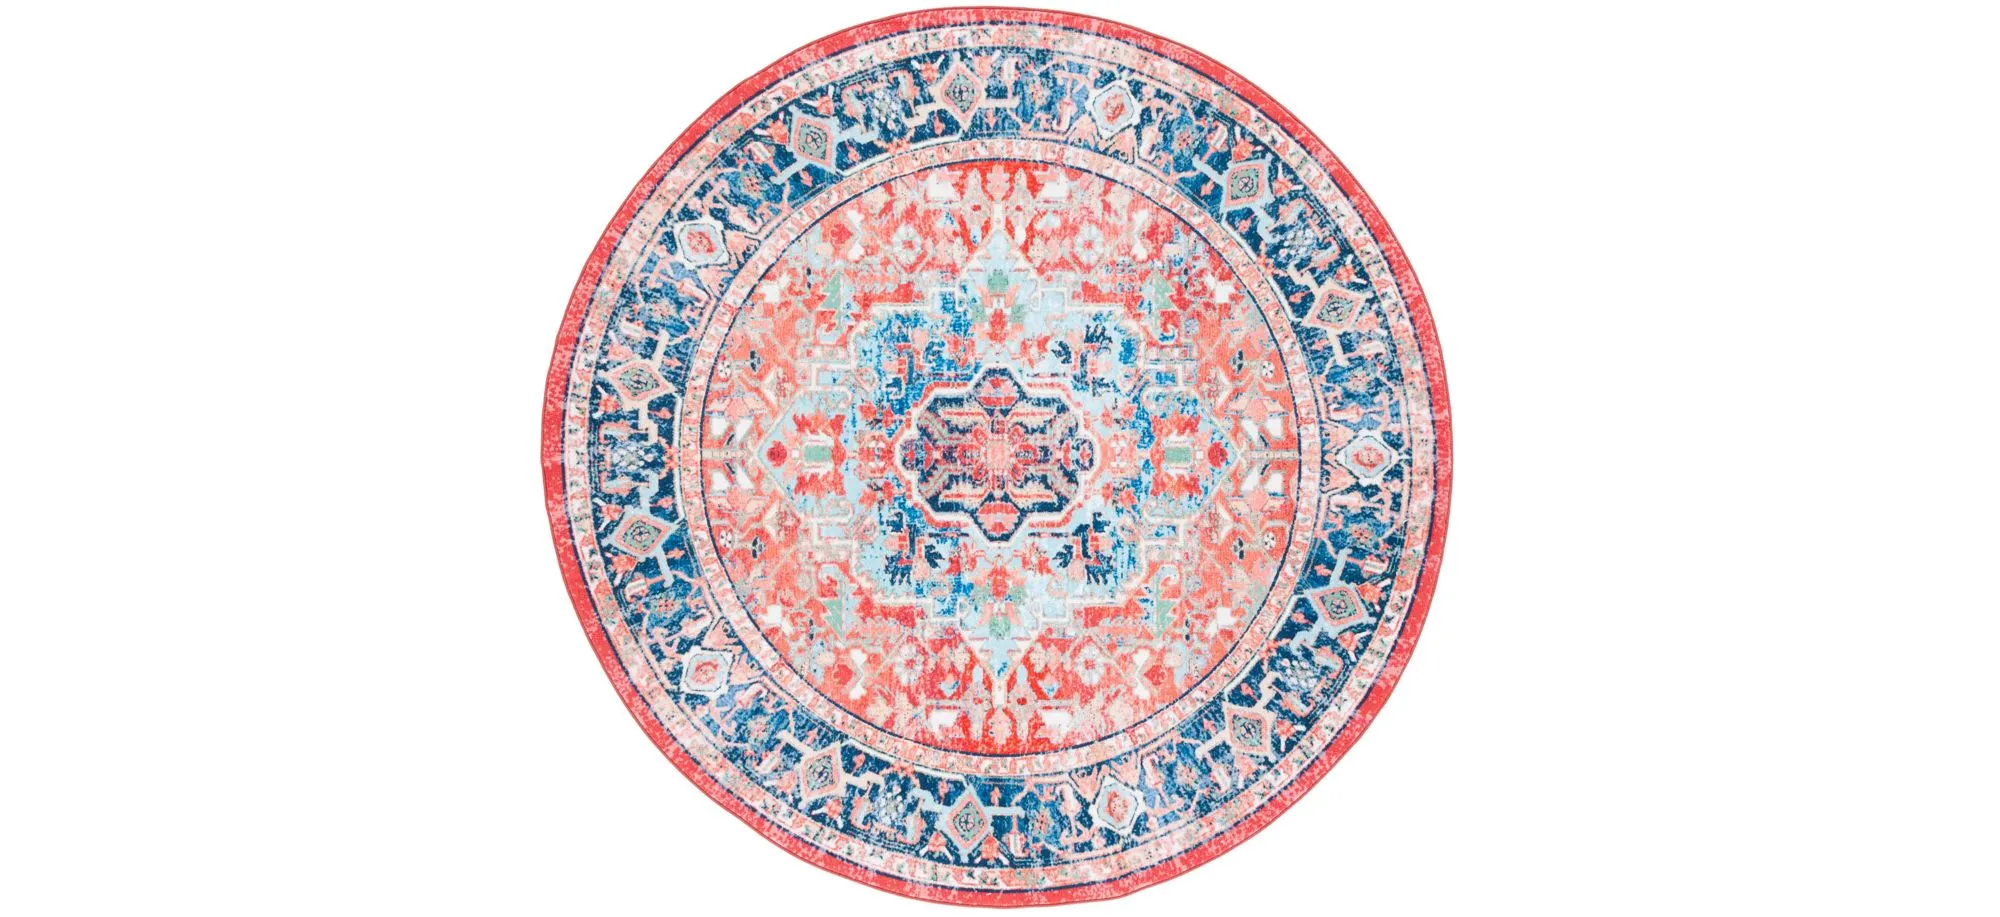 Resba Round Area Rug in Navy/Red by Safavieh